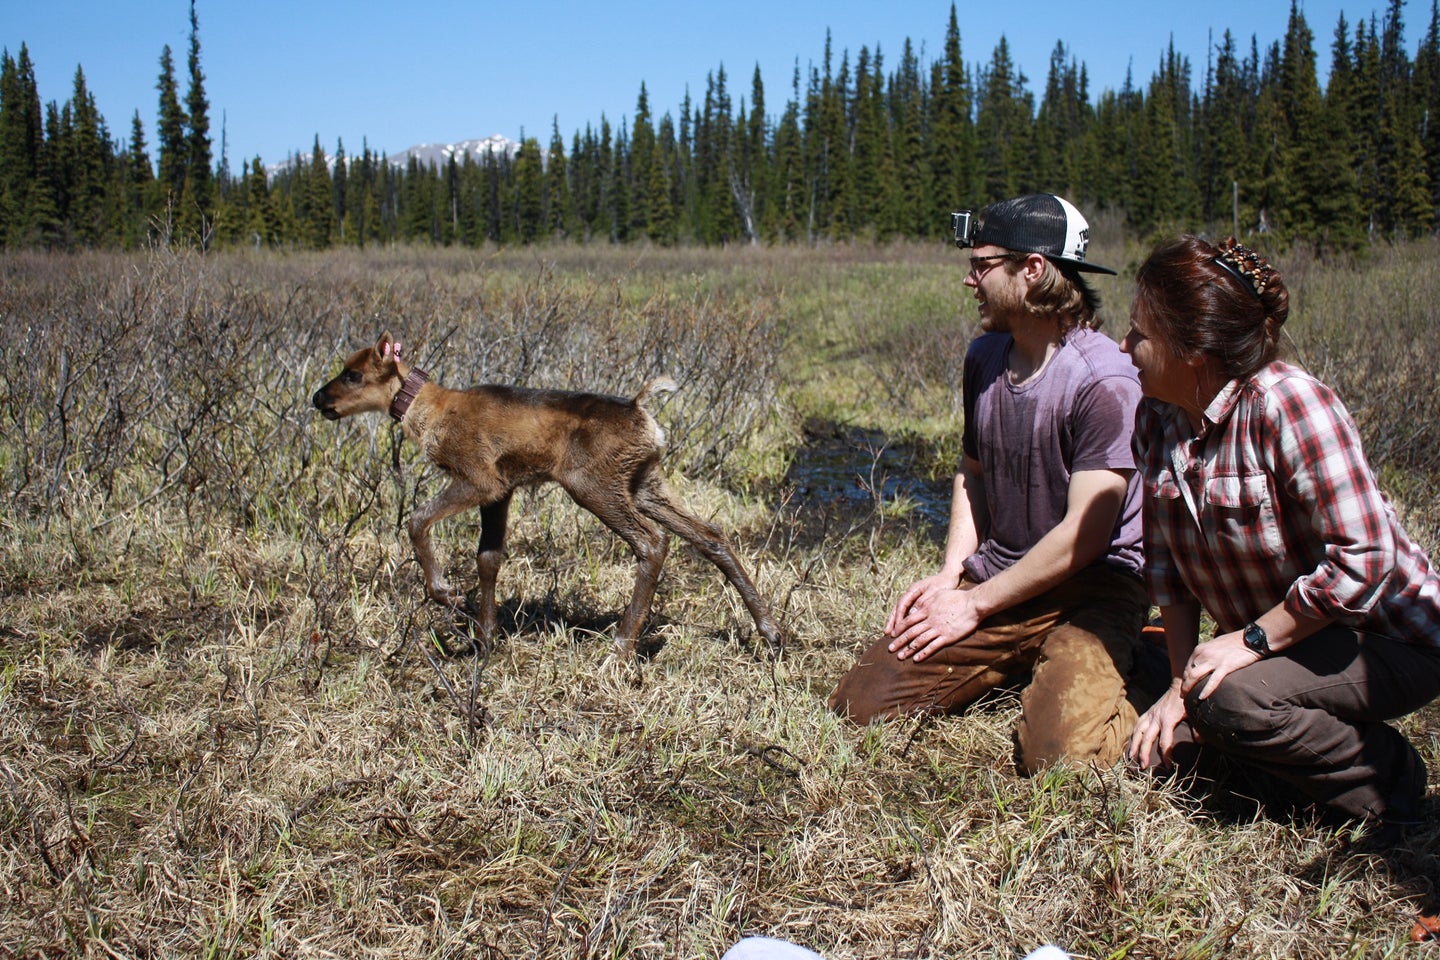 Two First Nations biologists releasing a caribou calf on the plains of British Columbia, Canada